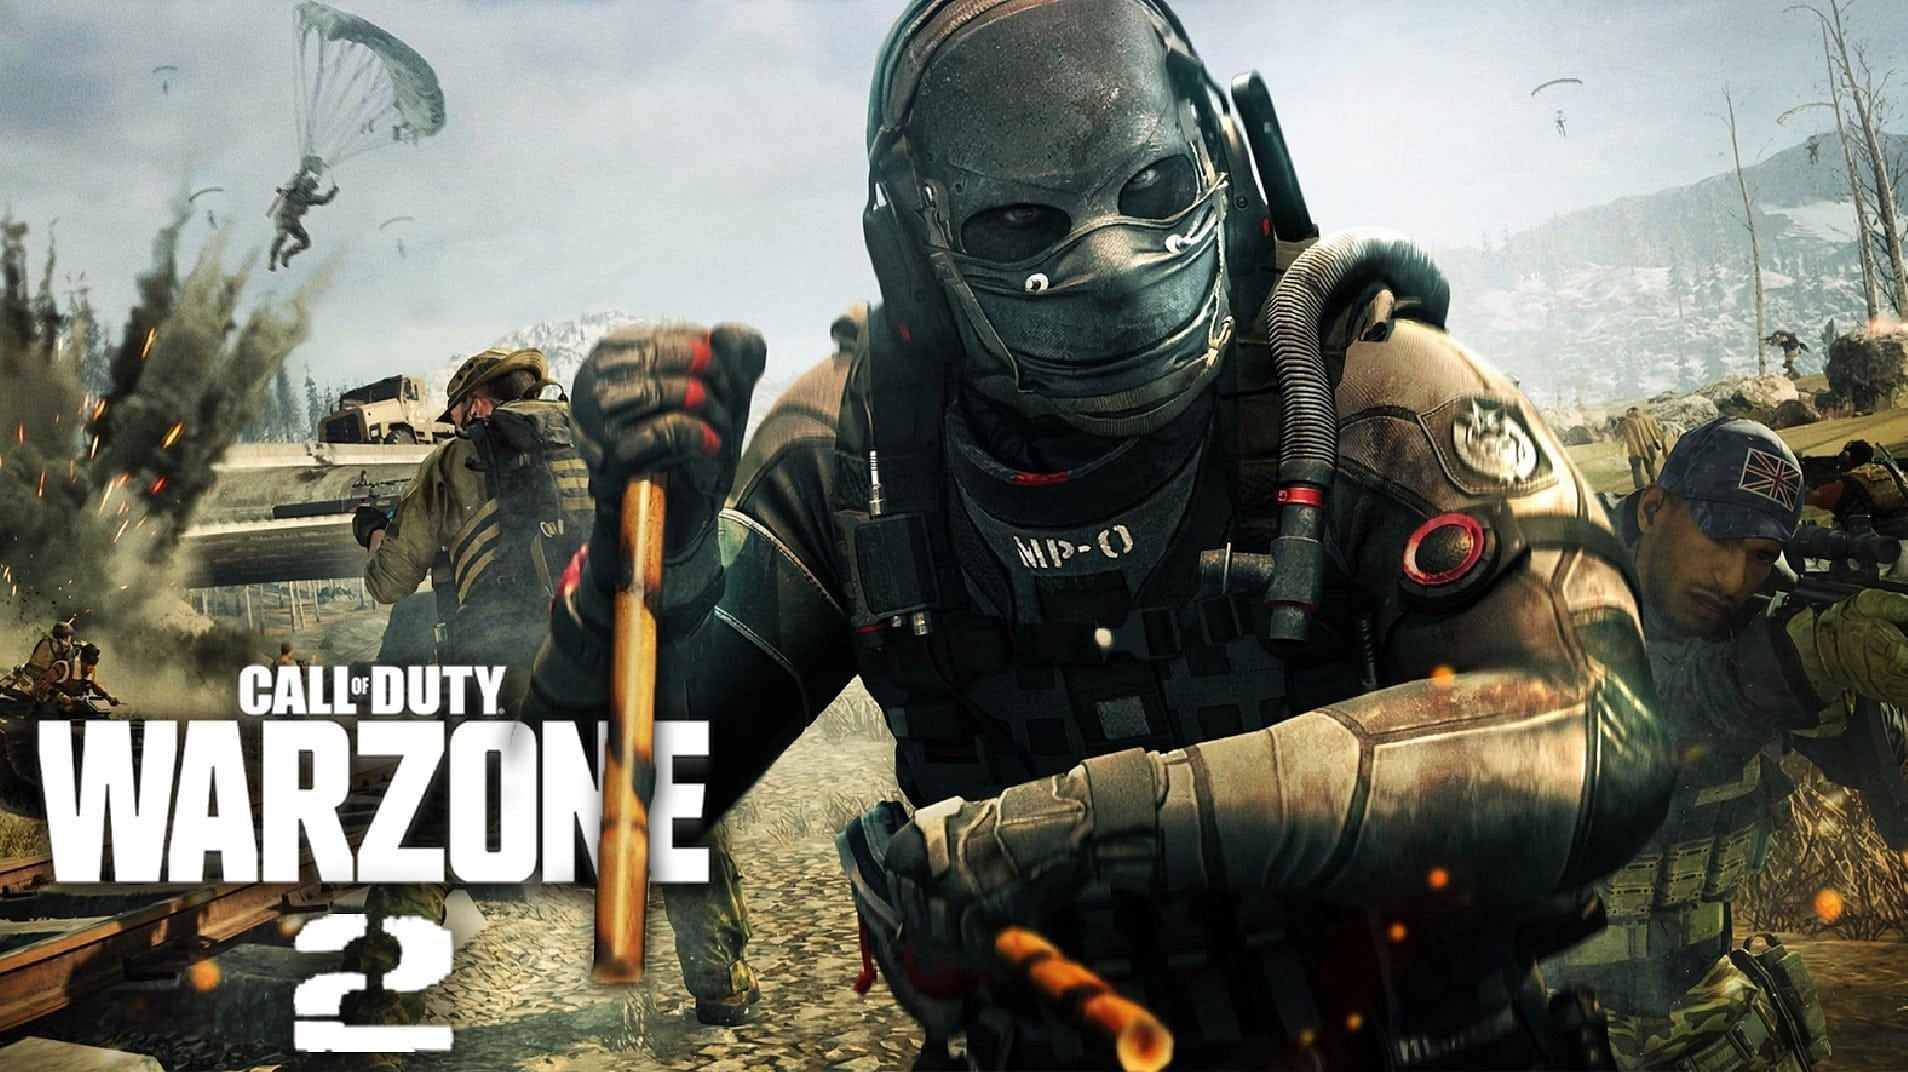 Warzone 2 will continue the battle royale style of play (Image via Activision)